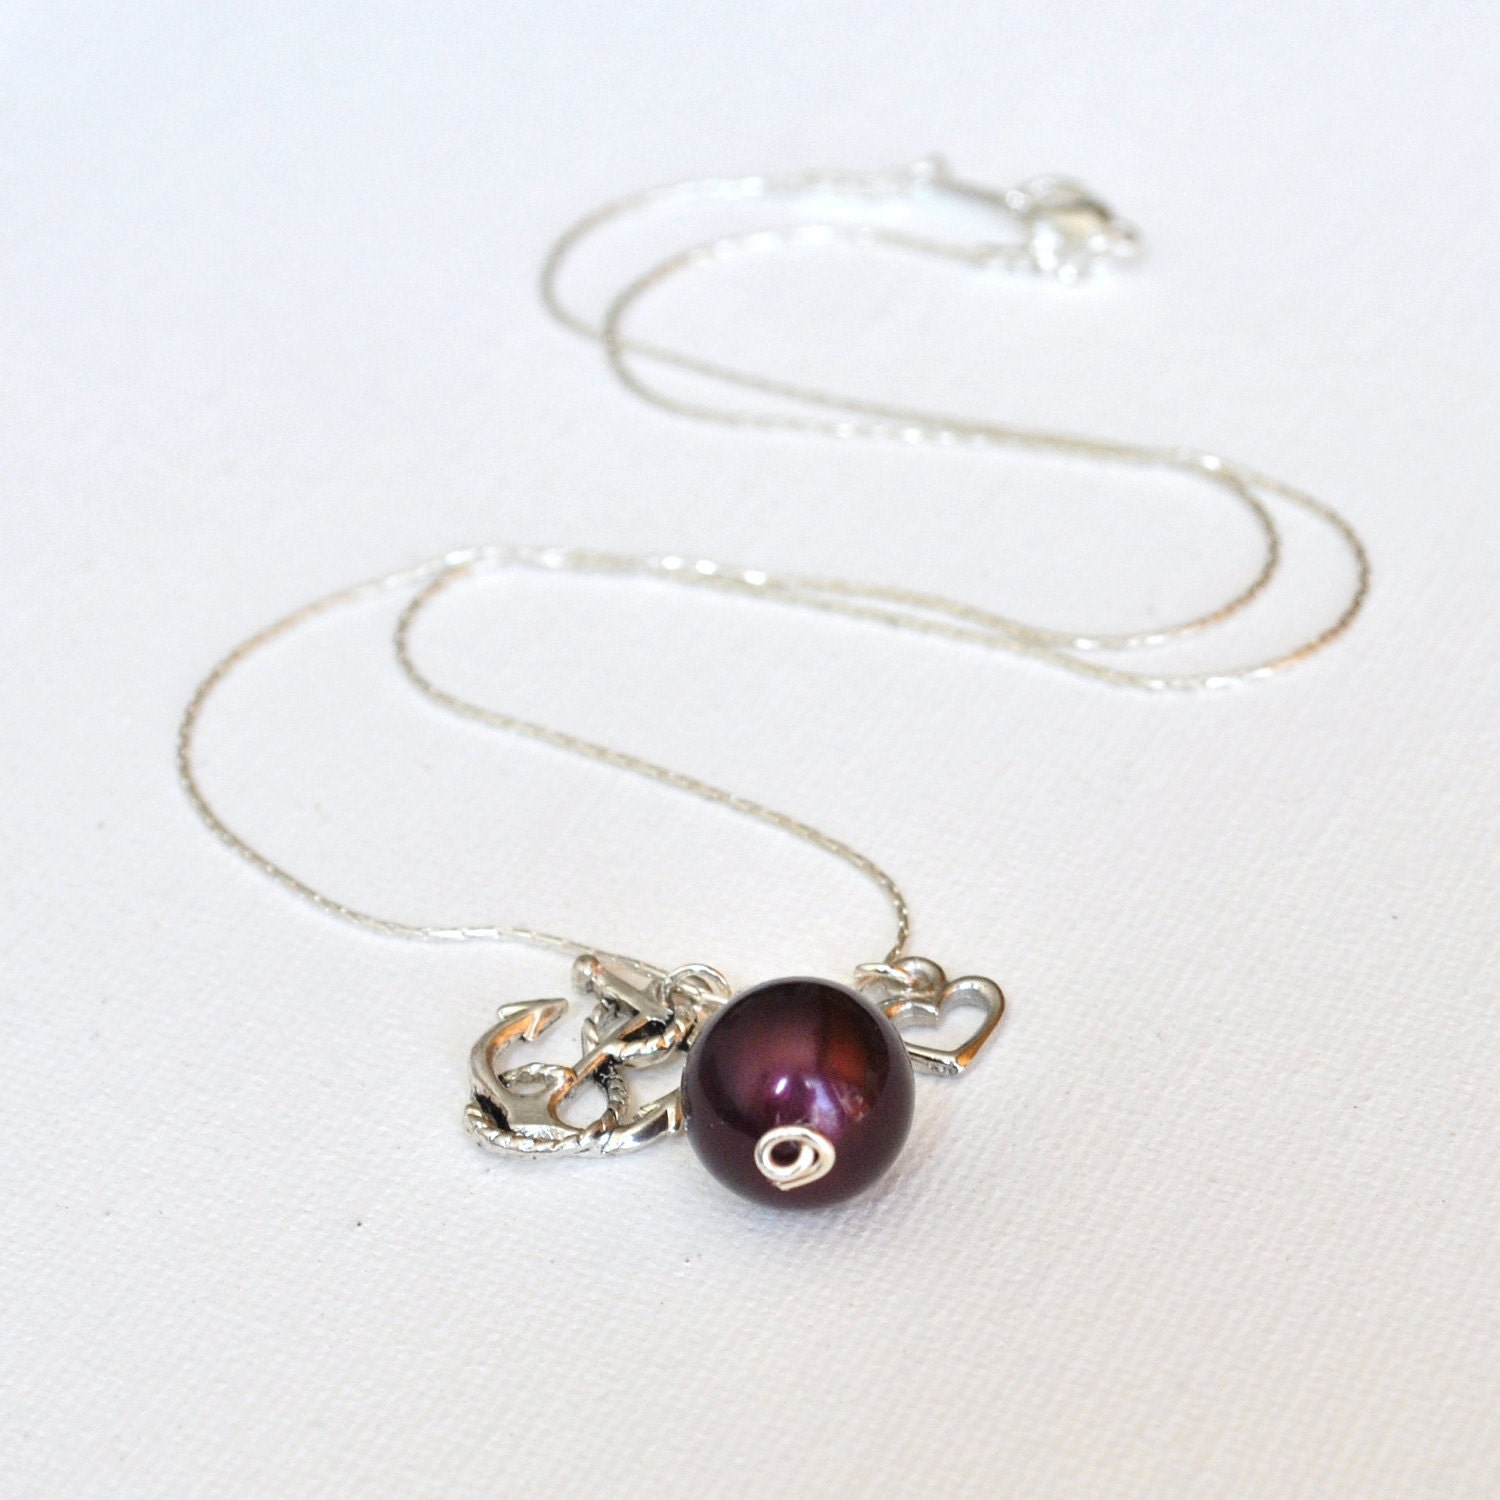 Anchor, Burgundy Pearl, and Heart - A Sailor's Love Necklace